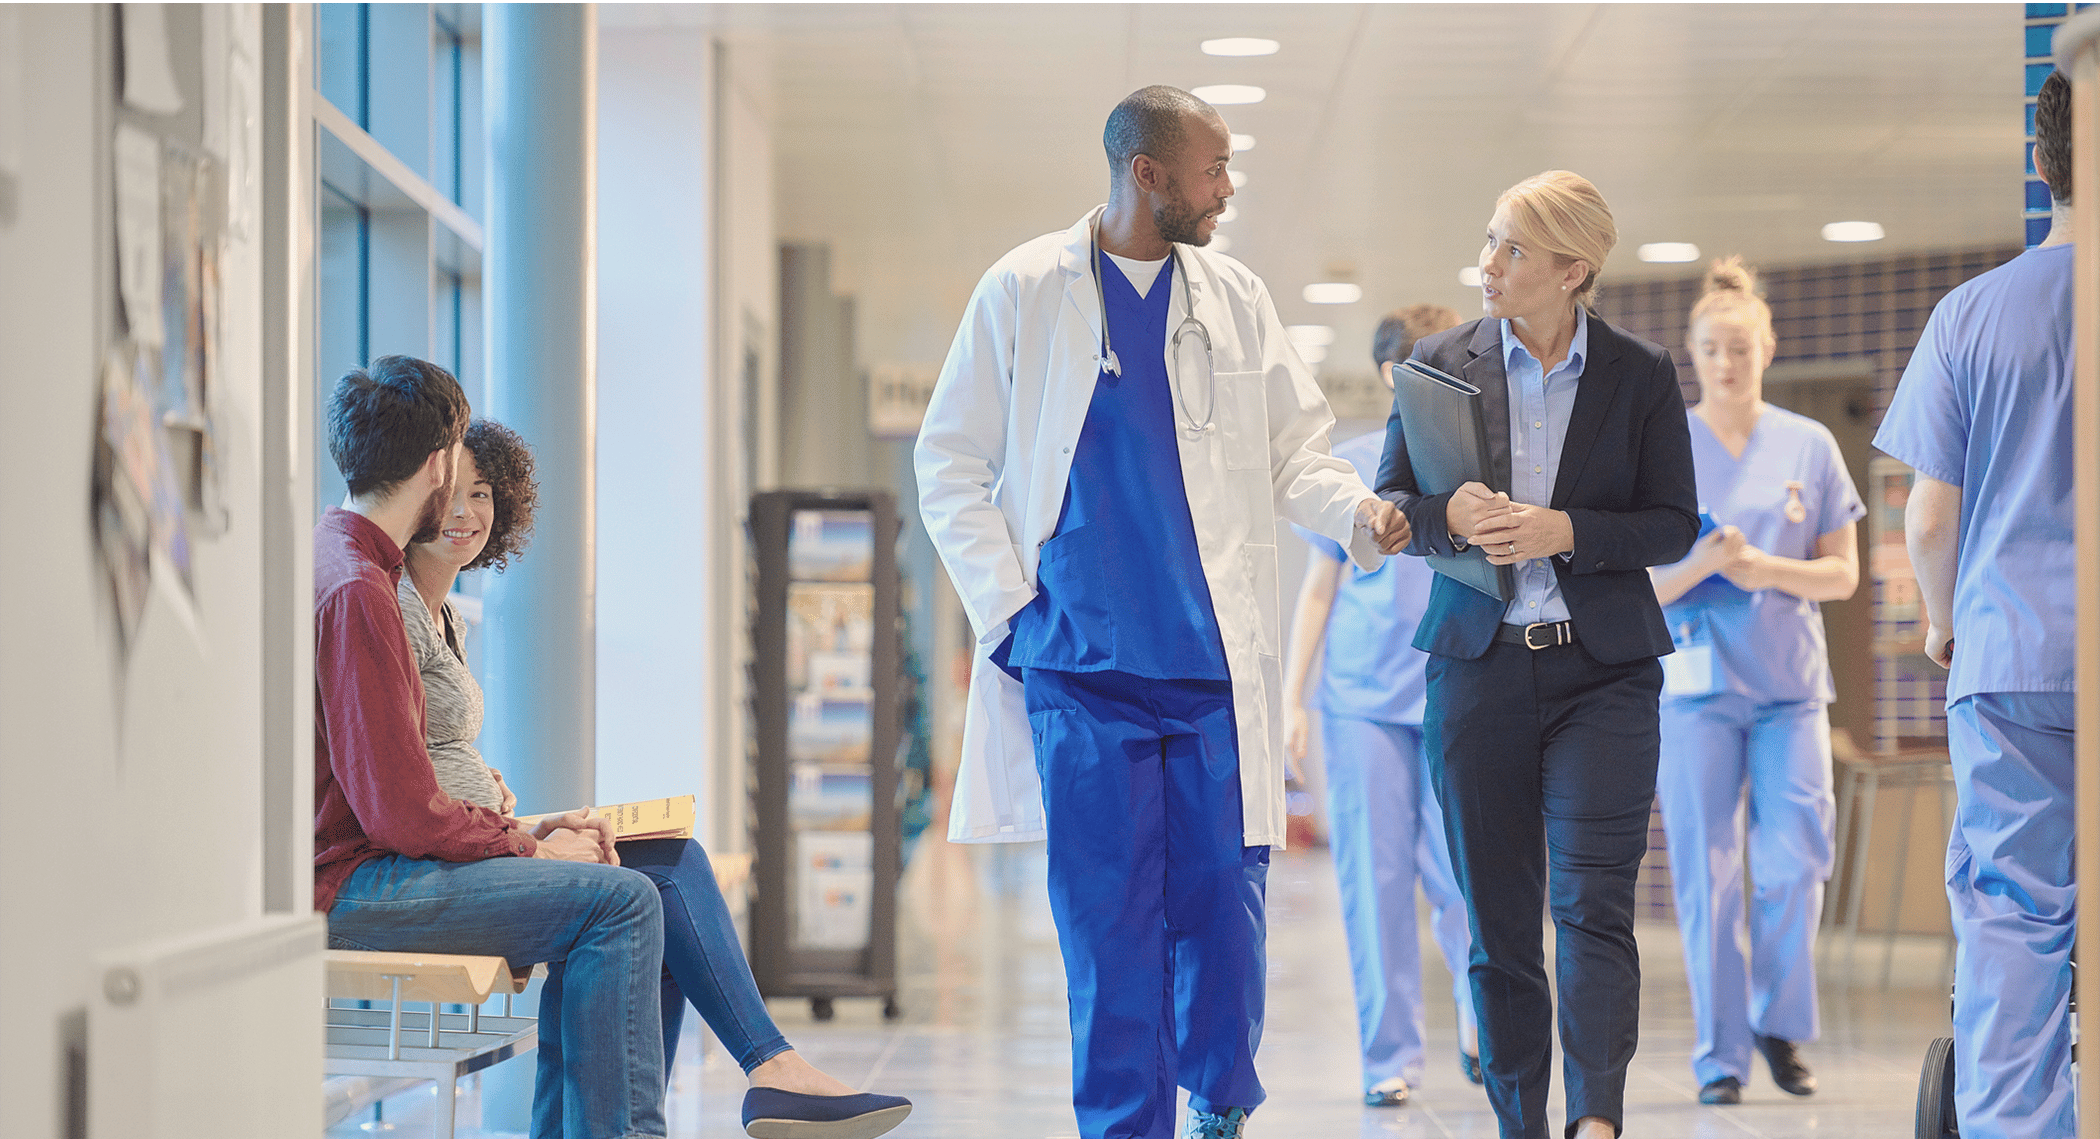 Doctor and healthcare consultant speaking while walking down hospital hallway